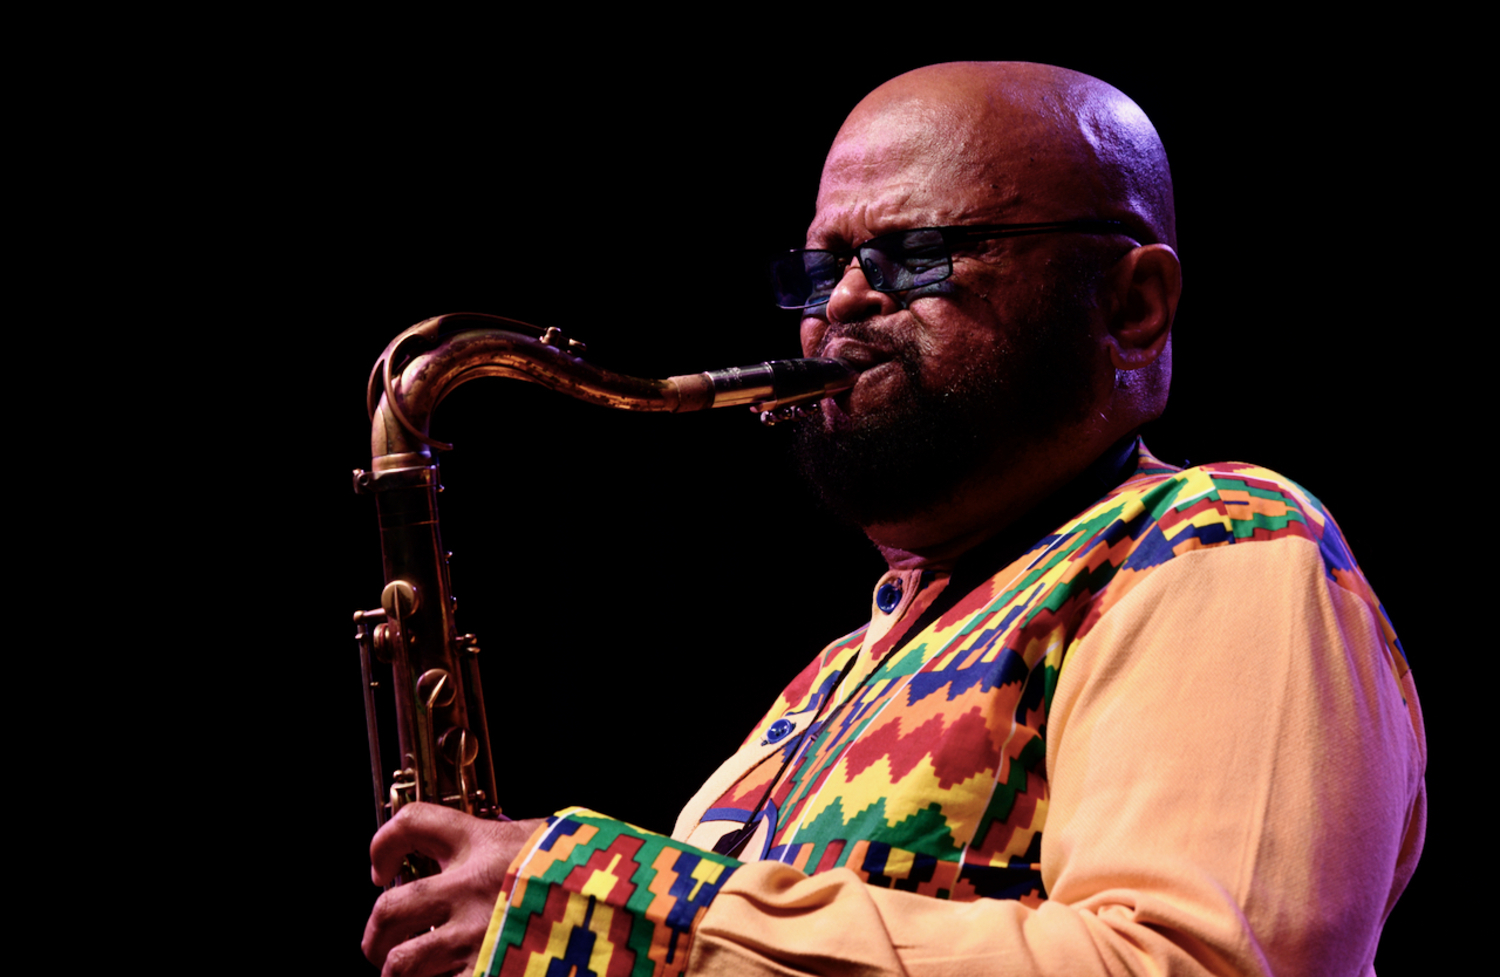 Jazz saxophonist Azar Lawrence performs at Southampton Arts Center on February 17. COURTESY THE ARTIST